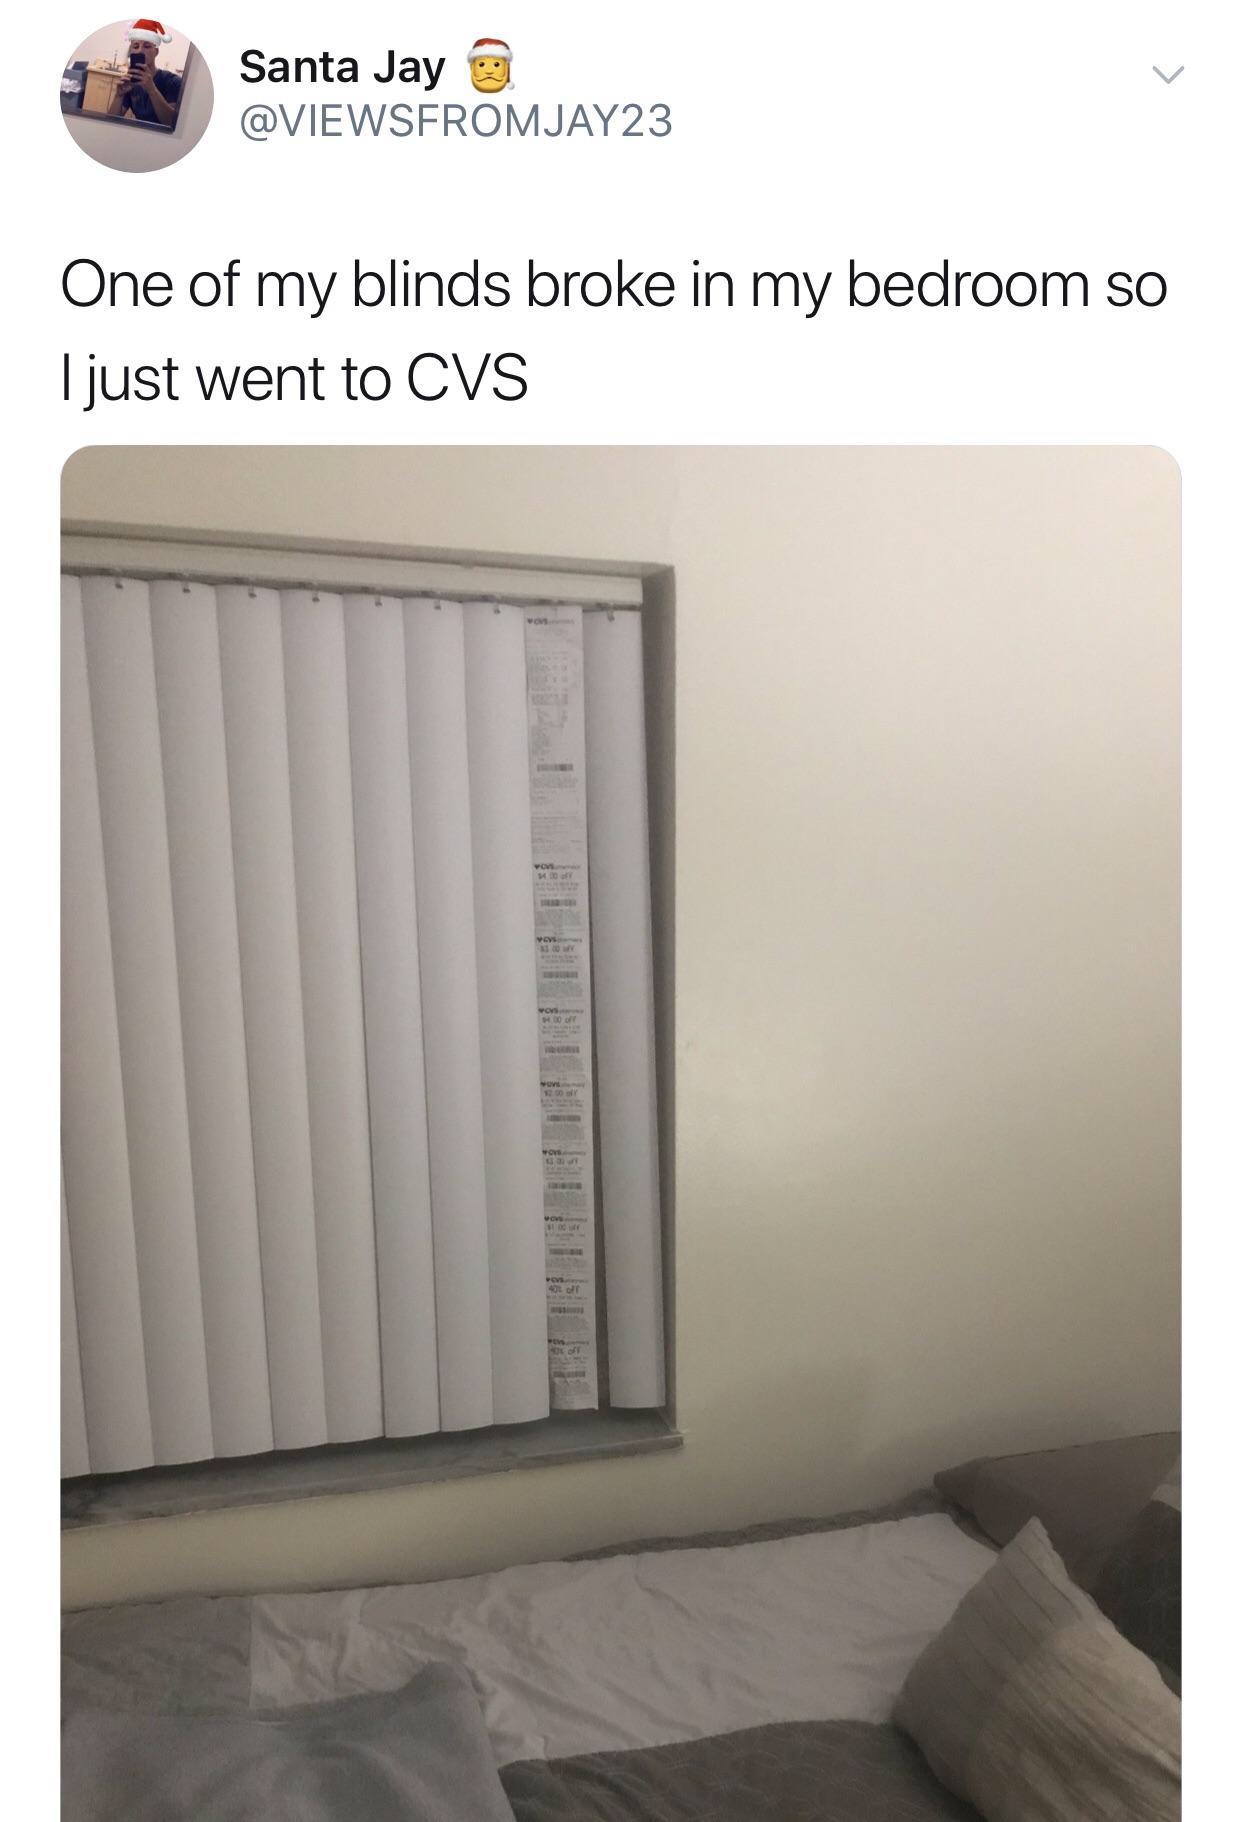 pics and memes - cvs receipt blinds - Santa Jay One of my blinds broke in my bedroom so I just went to Cvs